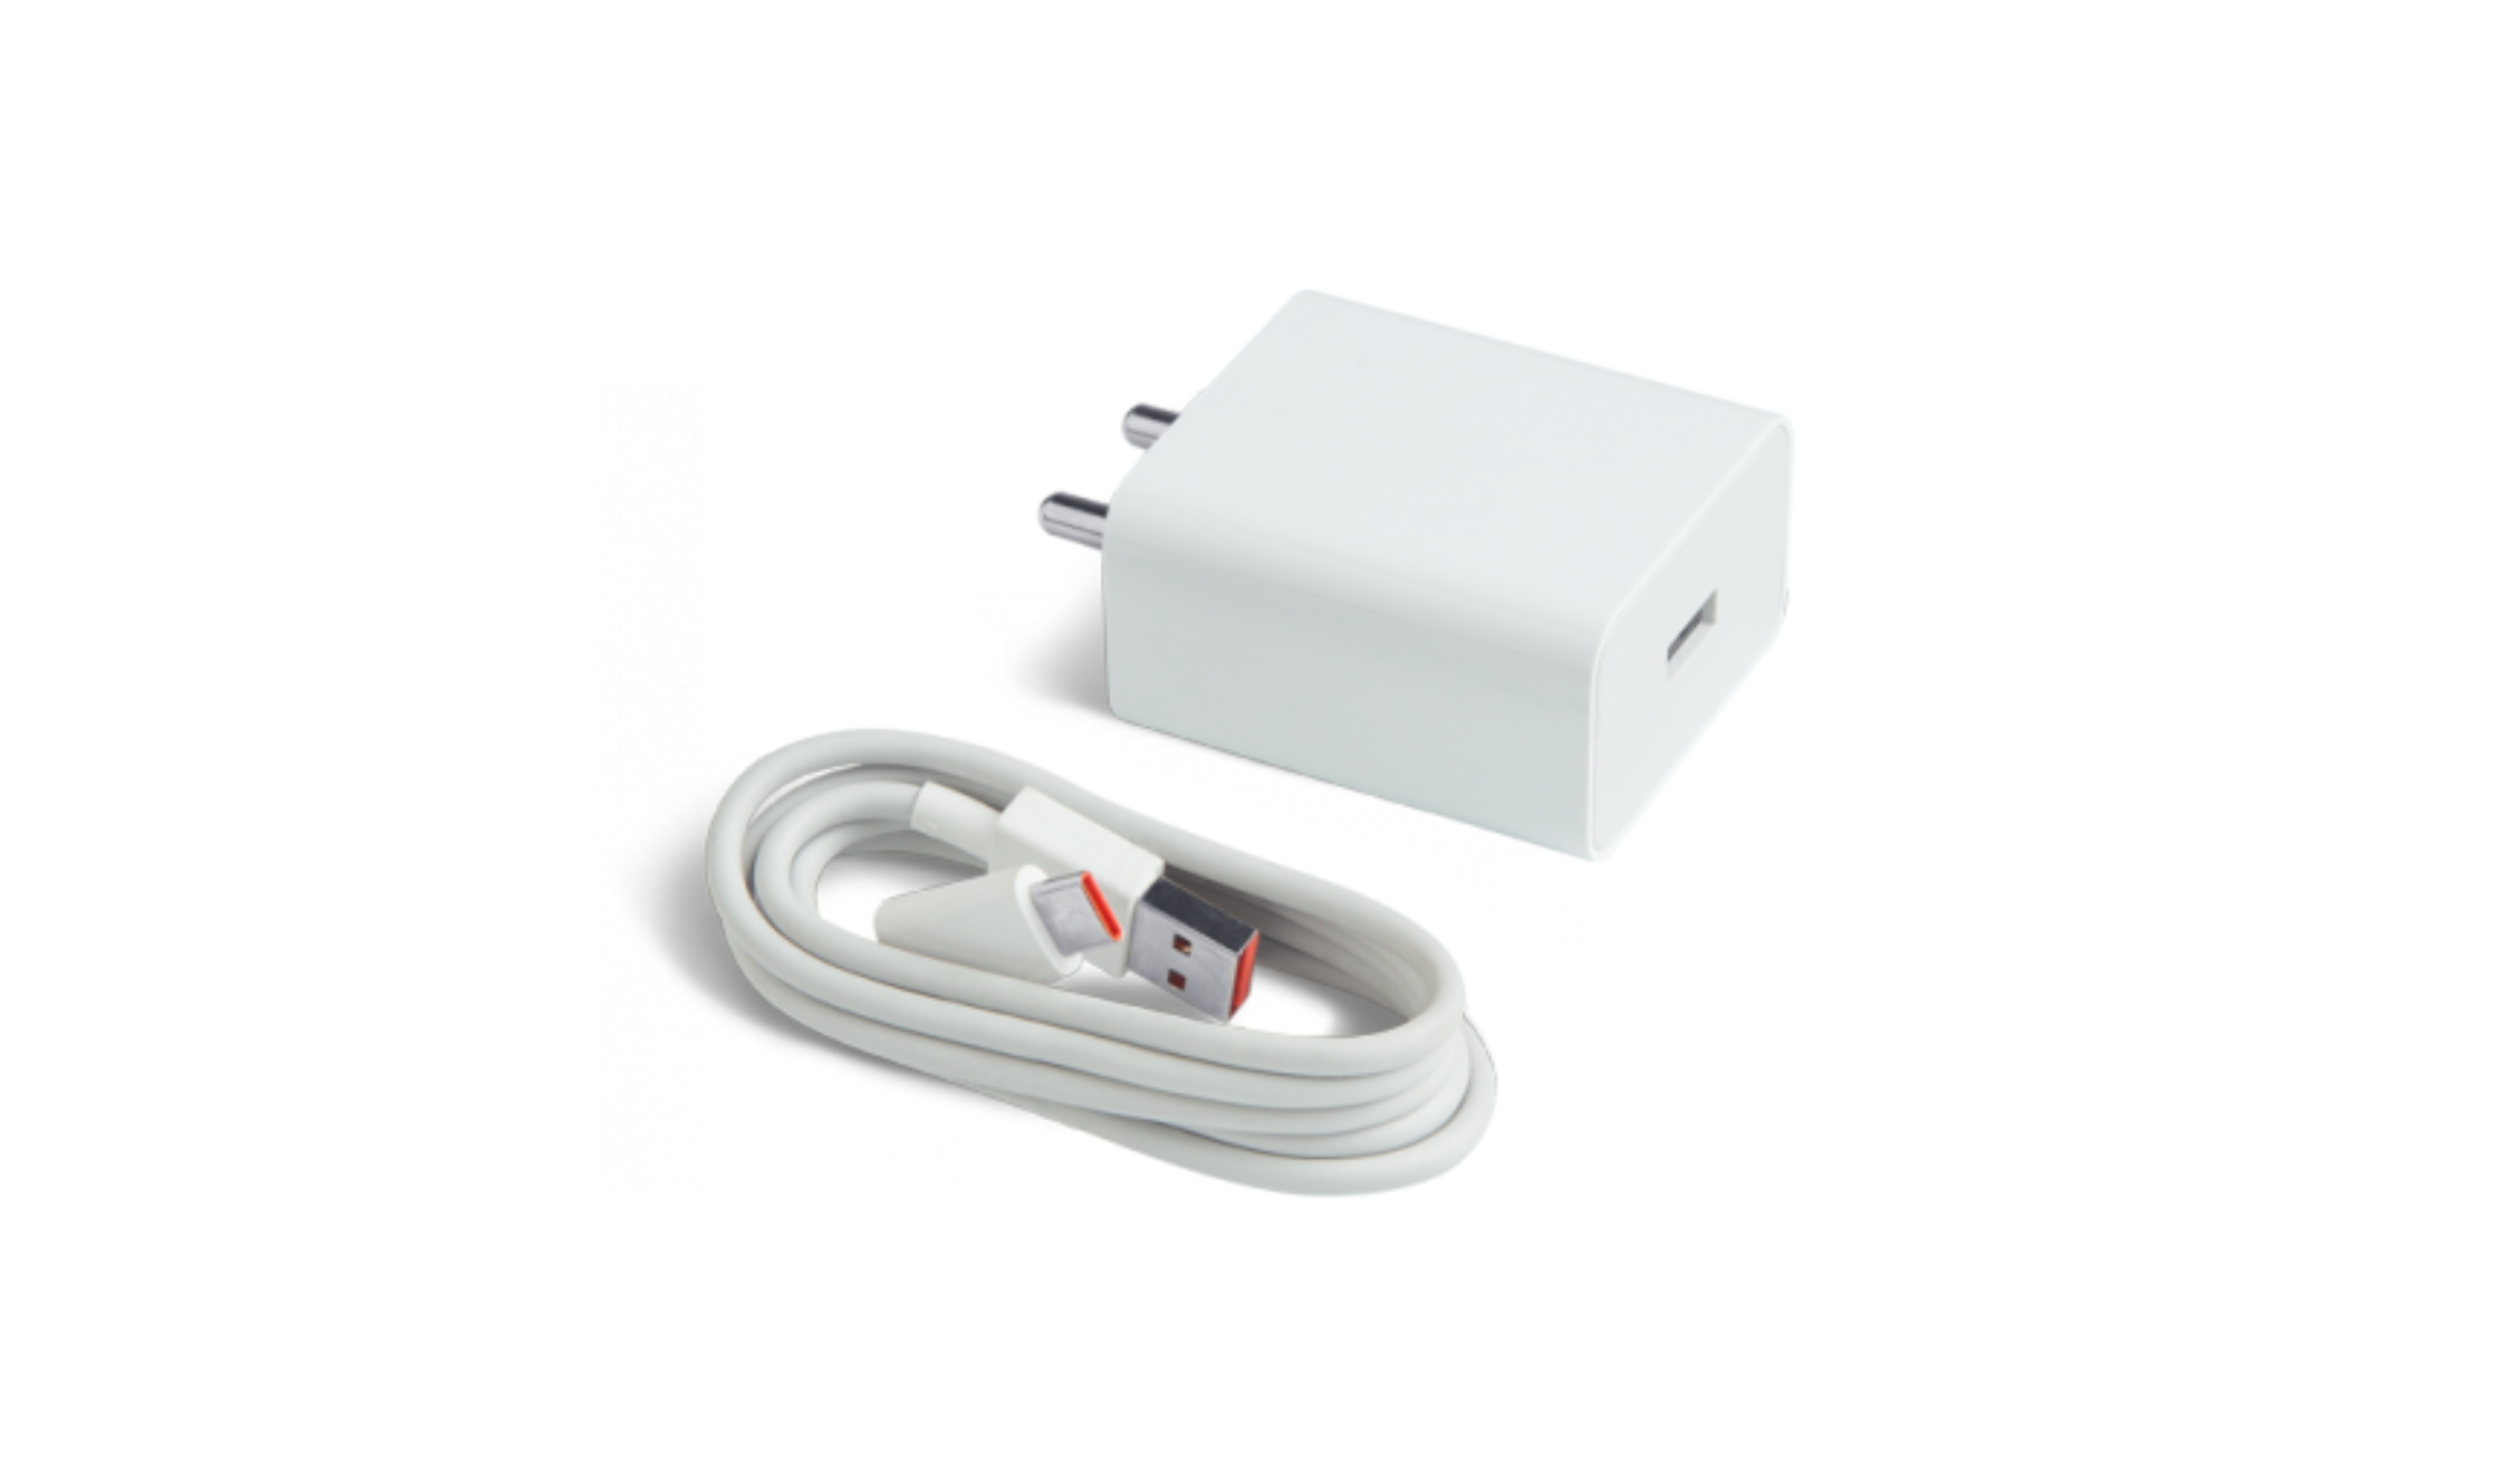 Xiaomi Mi 33W SonicCharge 2.0 Charger Featured